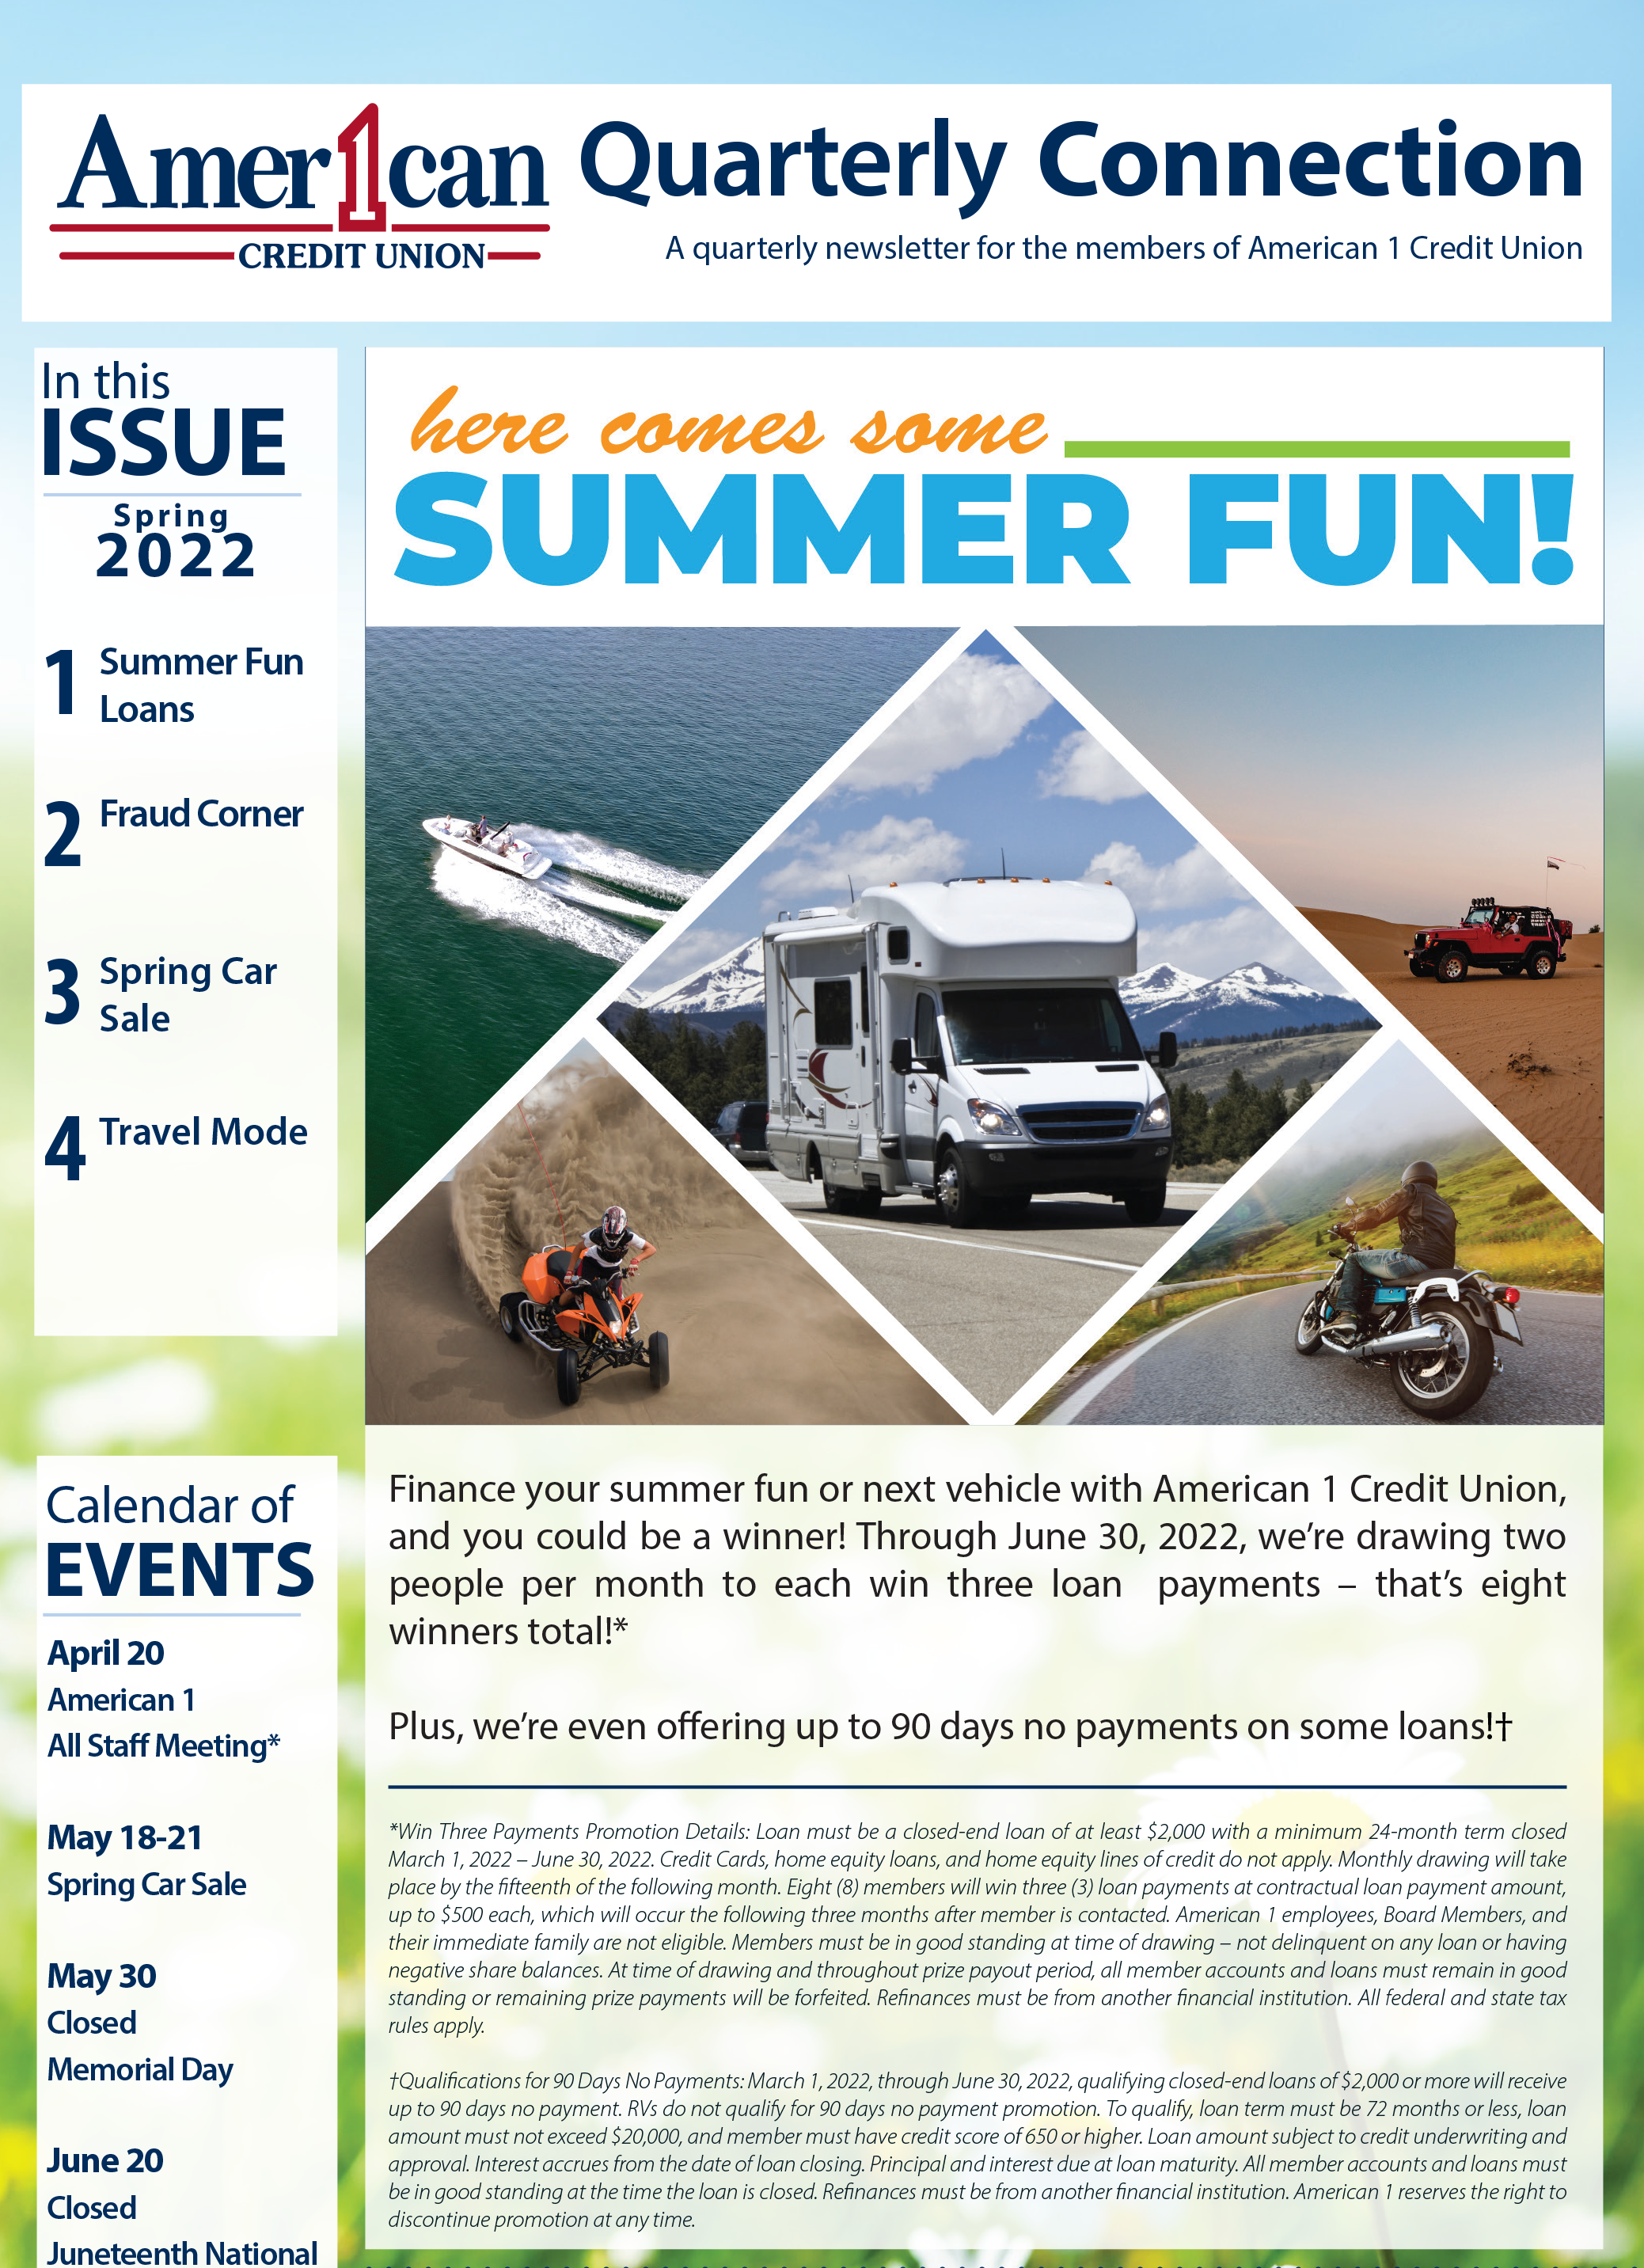 American 1 Credit Union Spring Quarterly Newsletter